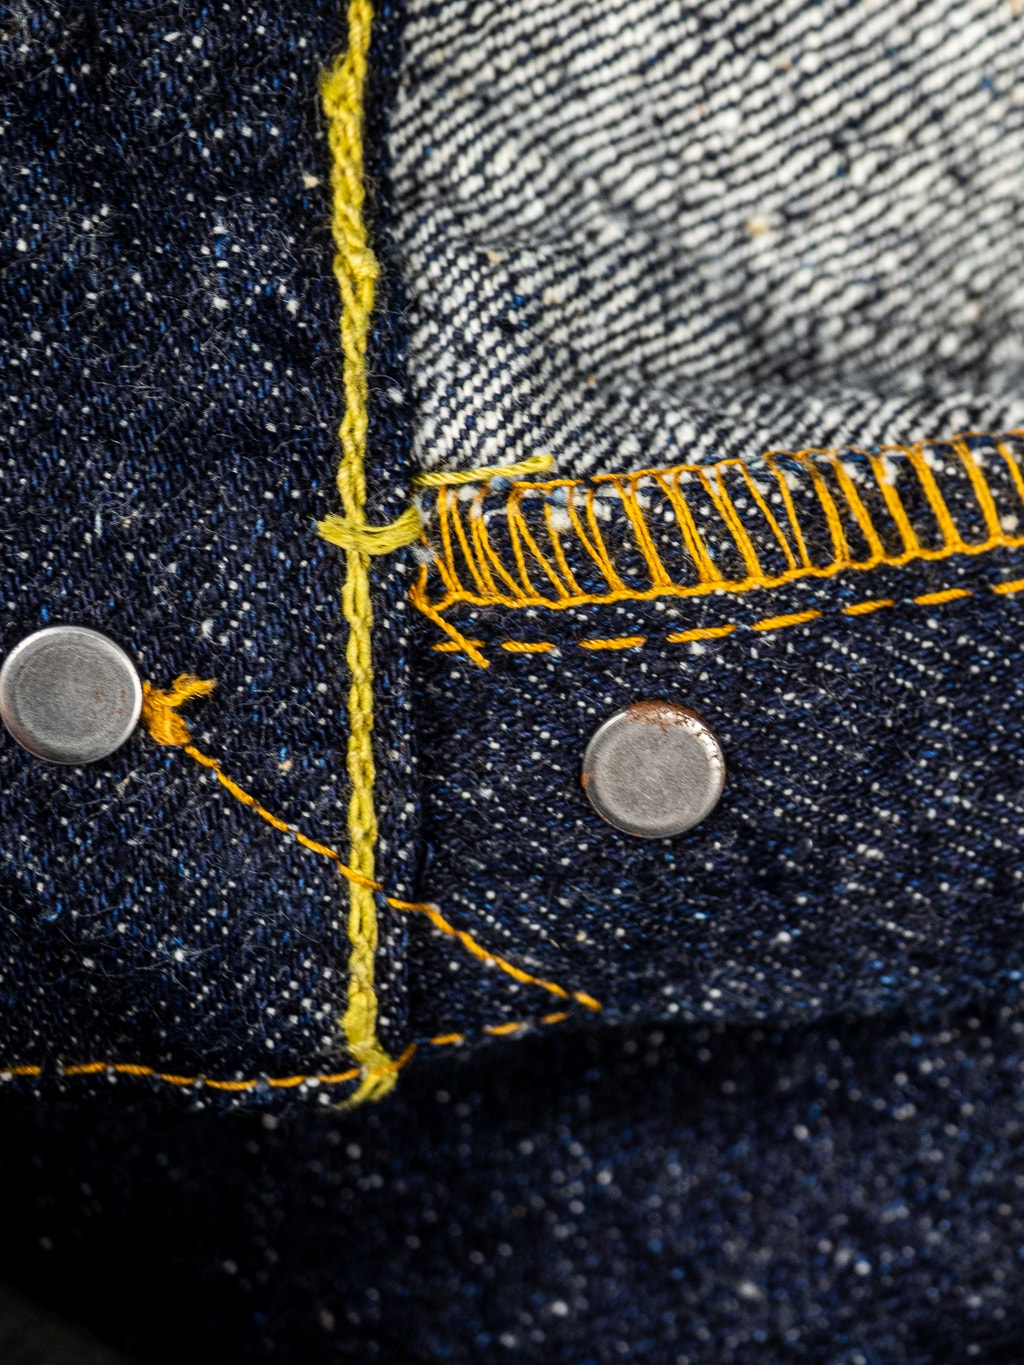 The Strike Gold Keep Earth Natural Indigo Jeans buttons interior